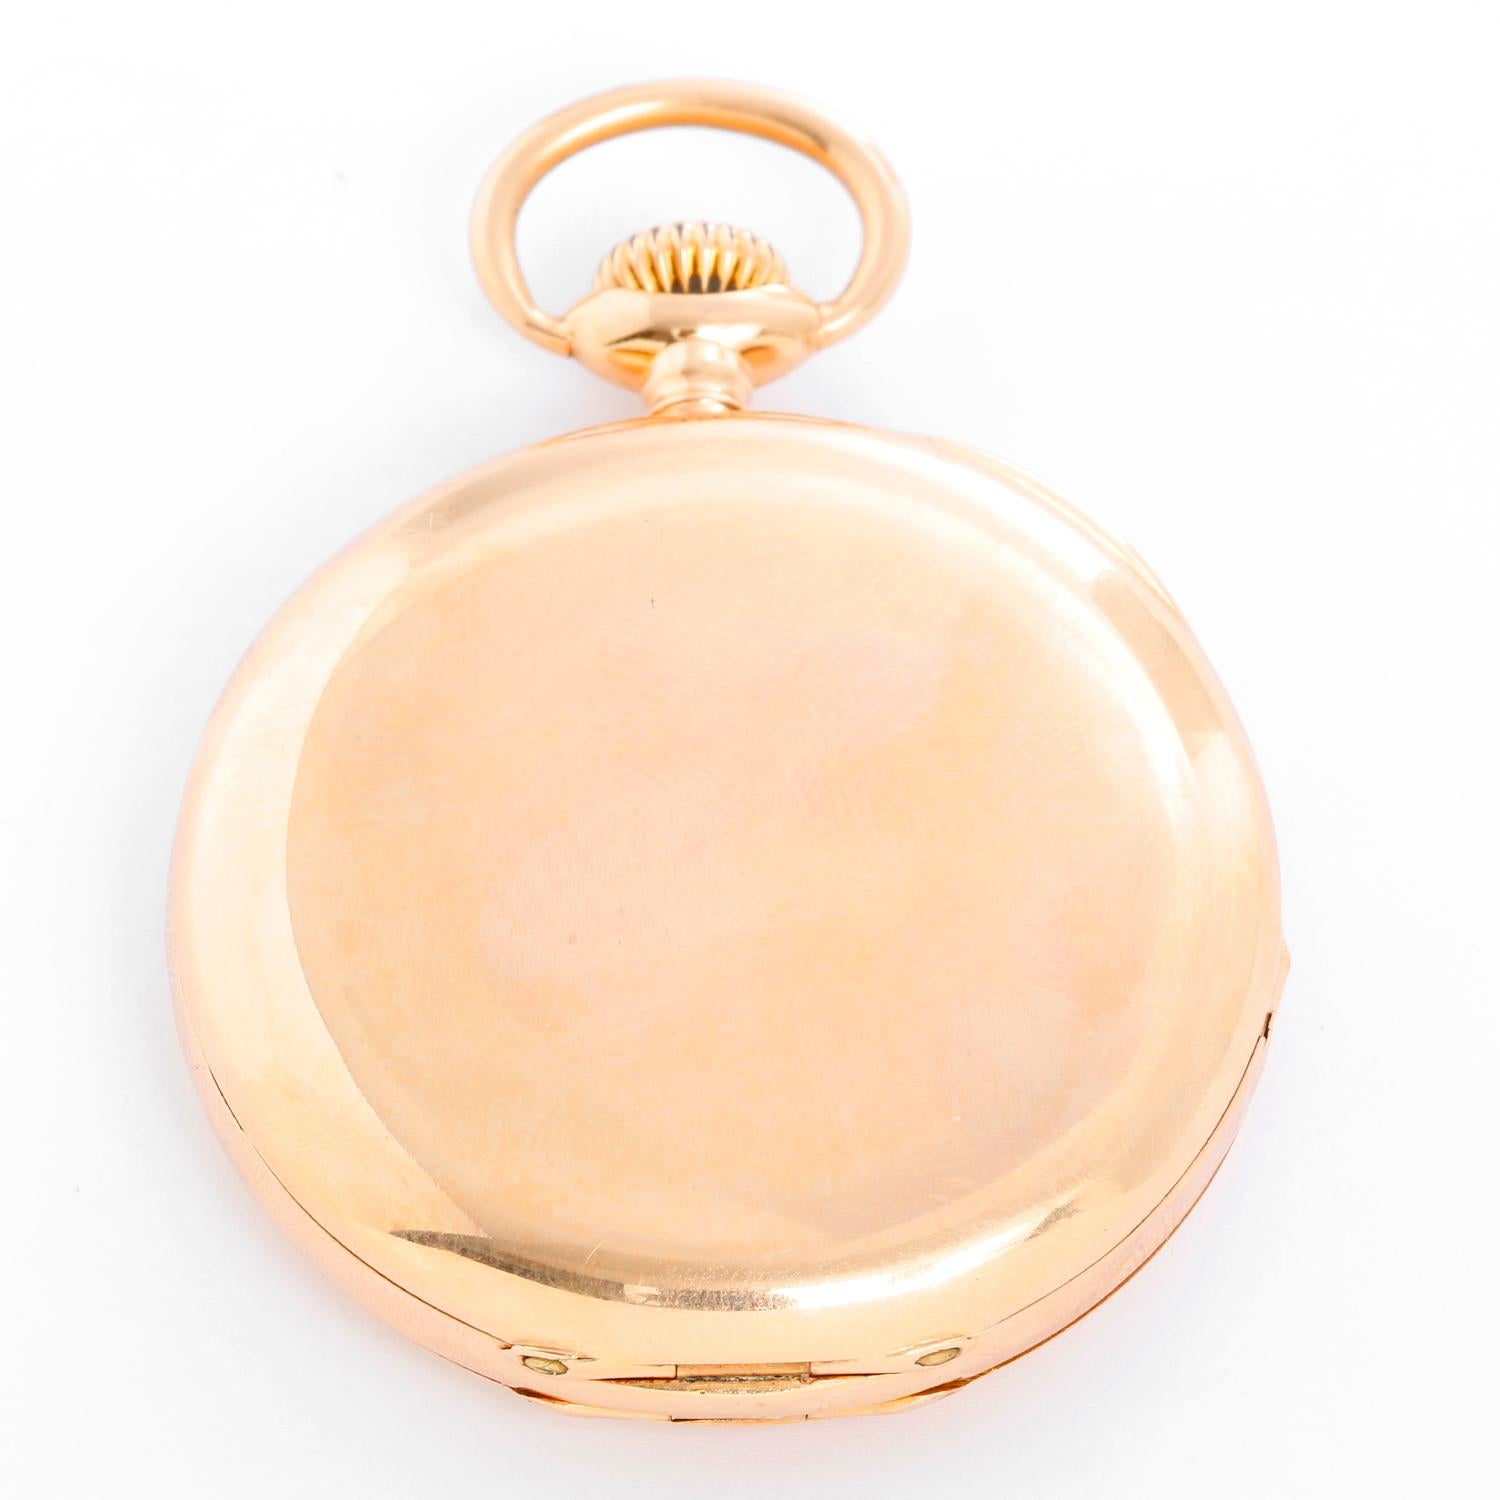 Patek Philippe 18K Yellow Gold Hinge Pocket Watch - Manual winding. 18K Yellow gold (47 mm) Case back insert engraved with makers mark and serial number . White dial with Roman numerals; subdial at 6 o'clock. Pre-owned with custom box.